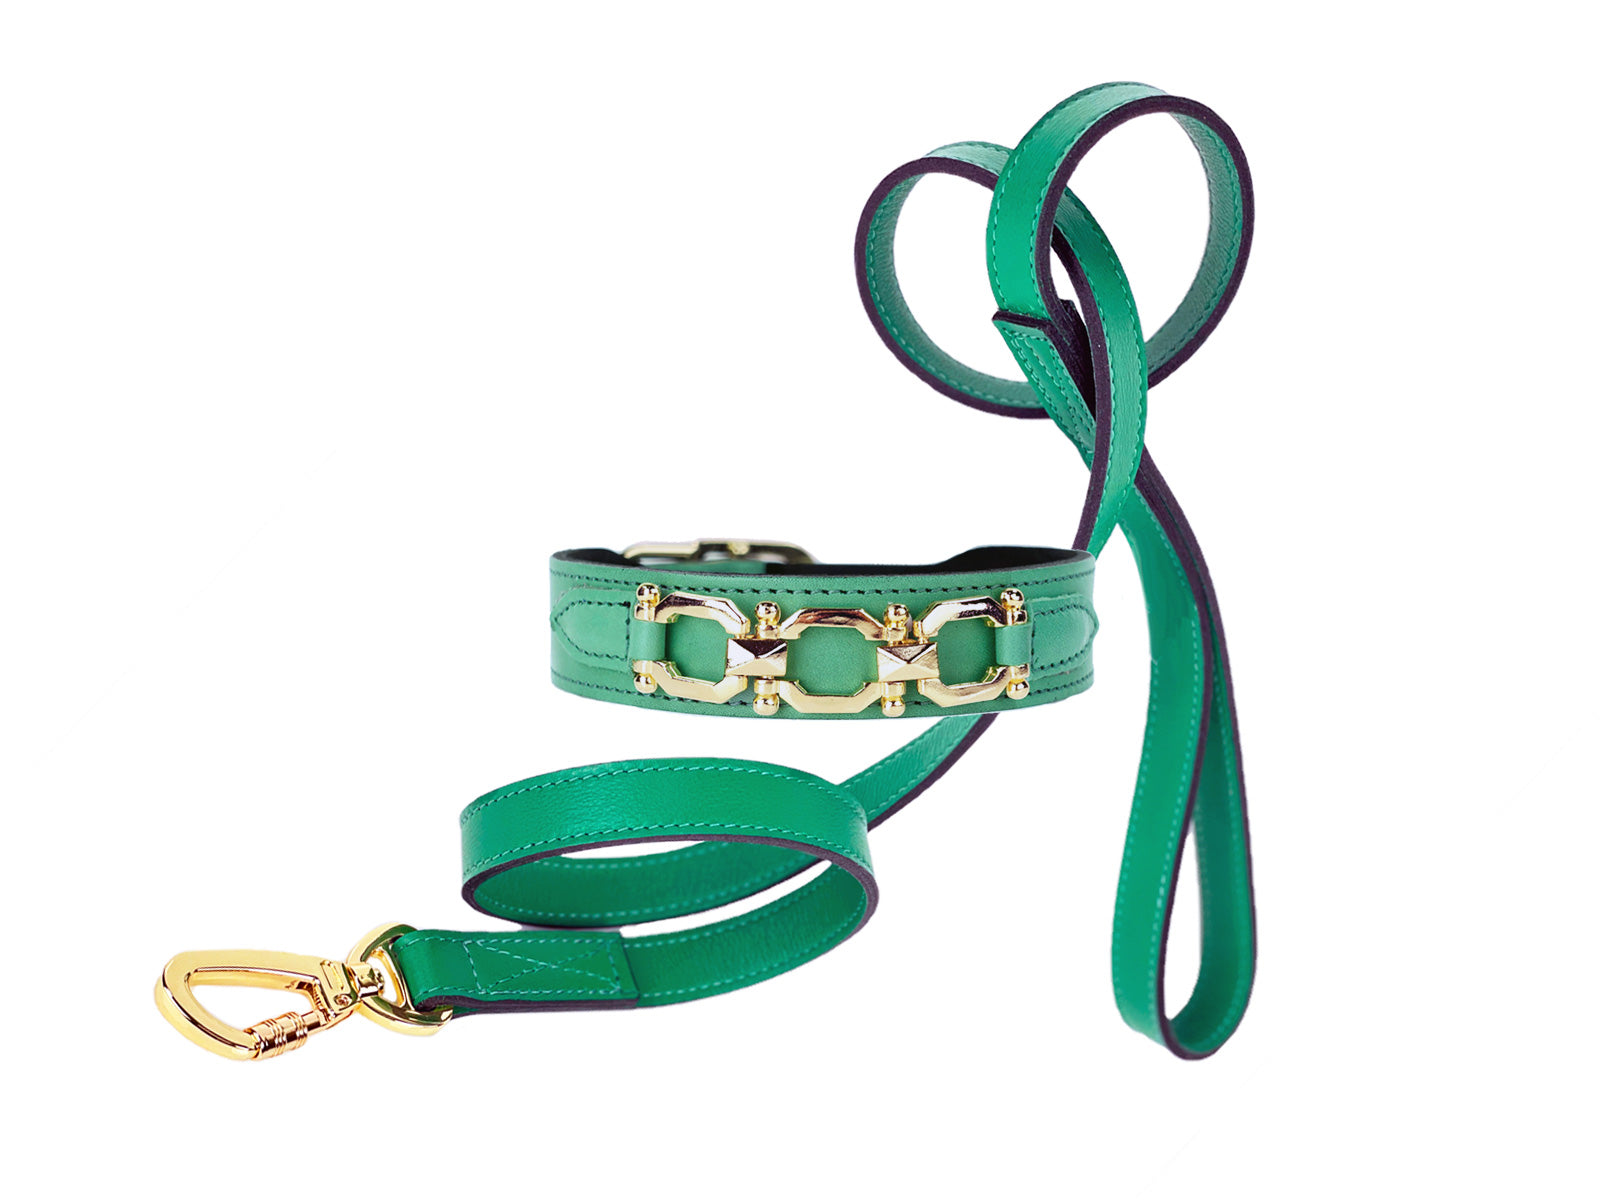 Georgia Rose Luxury Dog Collar and Leash Collection